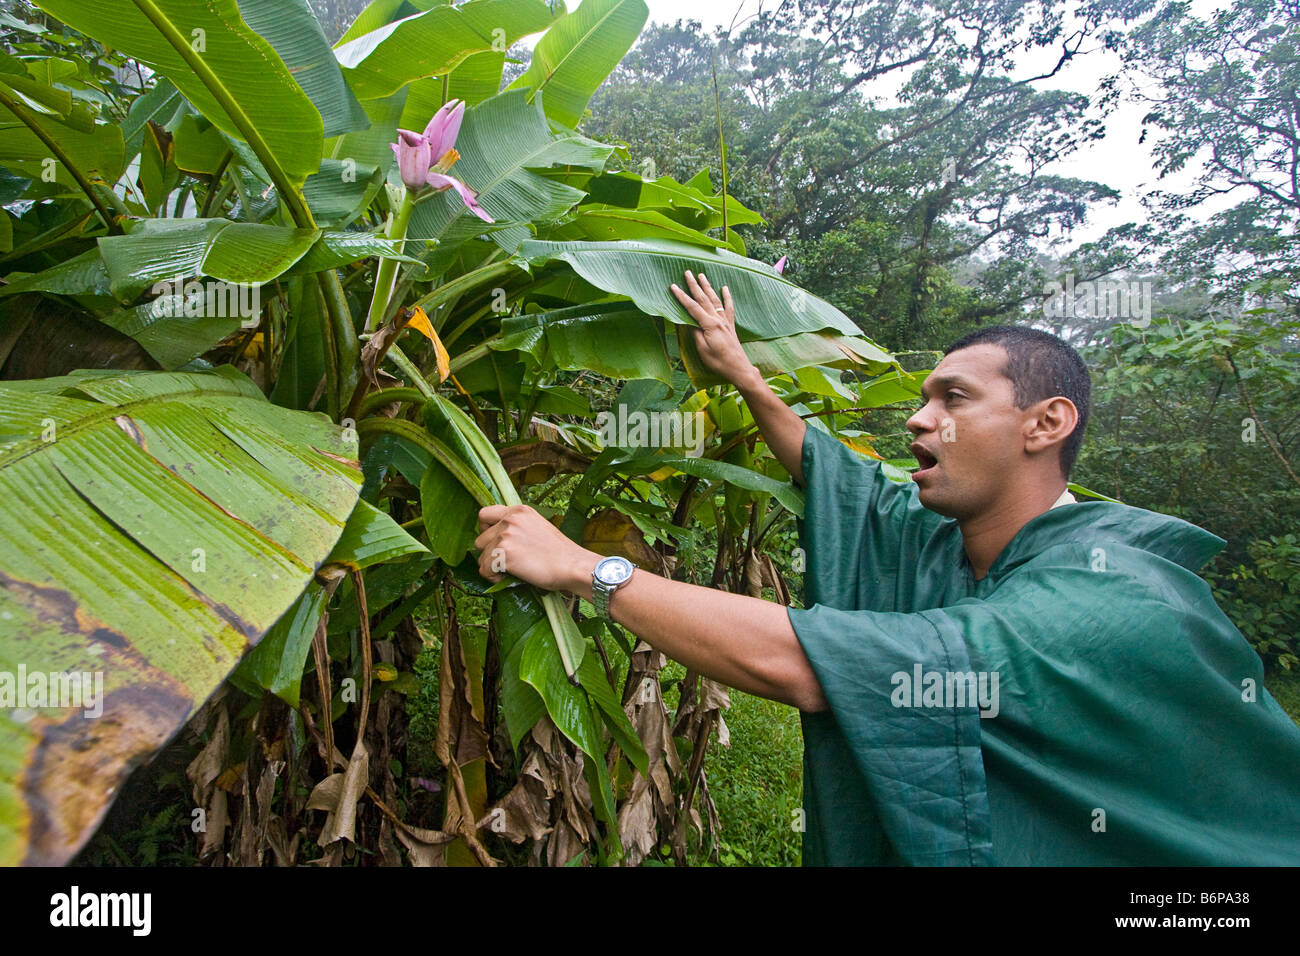 Guide shows flower from jute plant (in banana family) during hike in Costa Rican rainforest Stock Photo